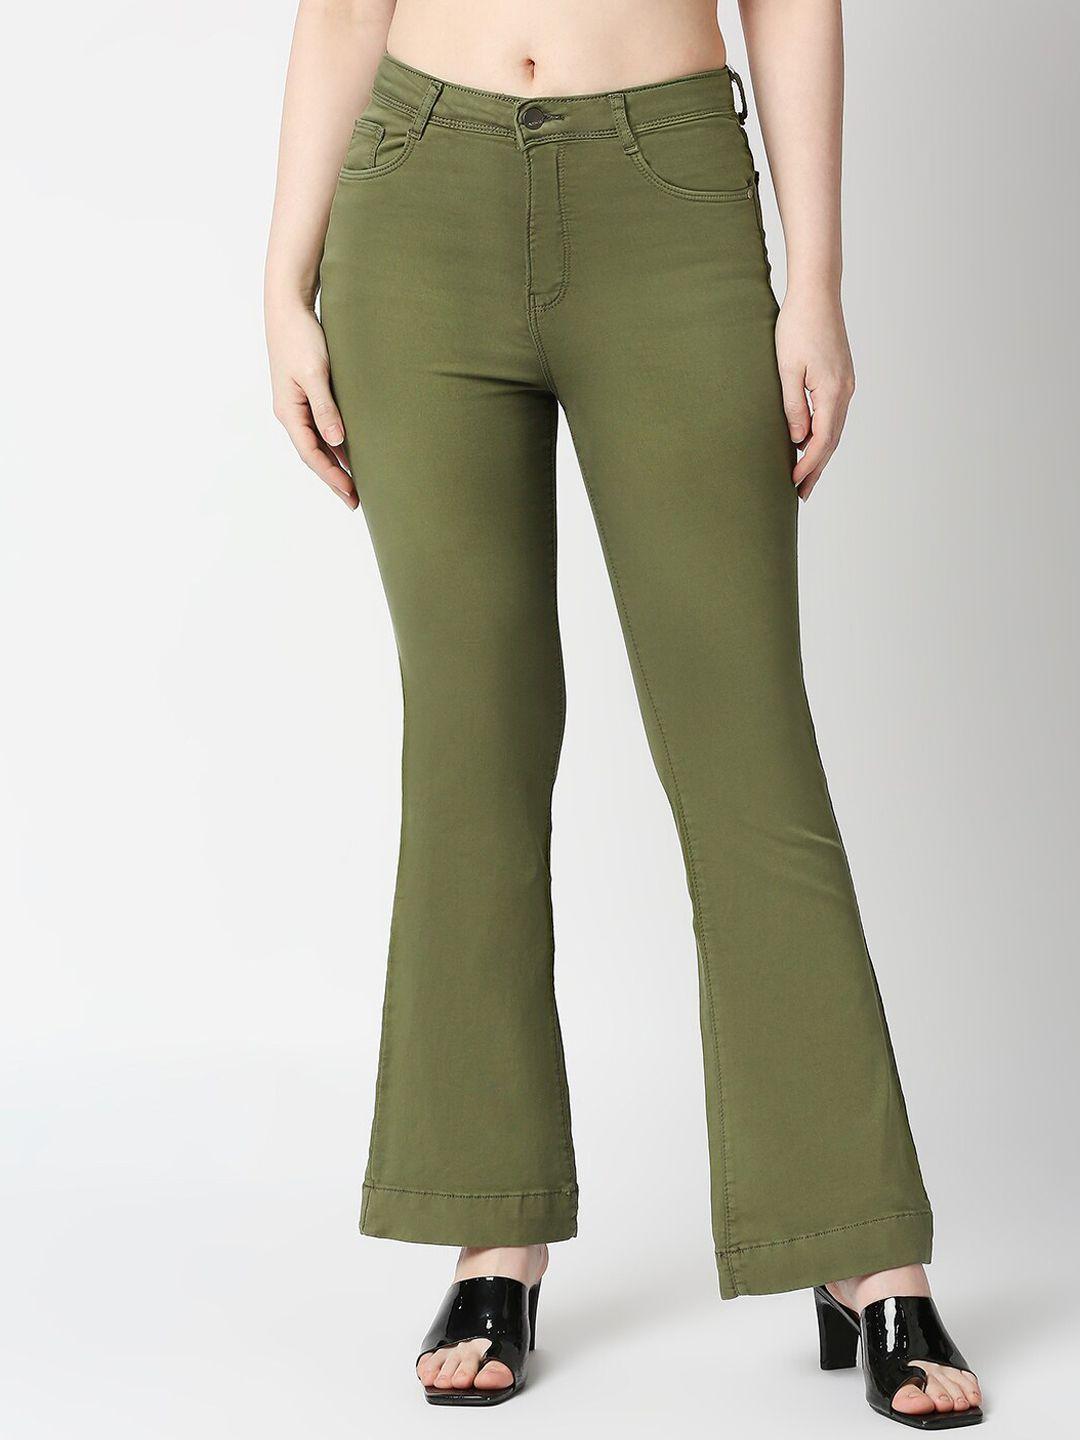 kraus jeans women olive green skinny fit high-rise jeans